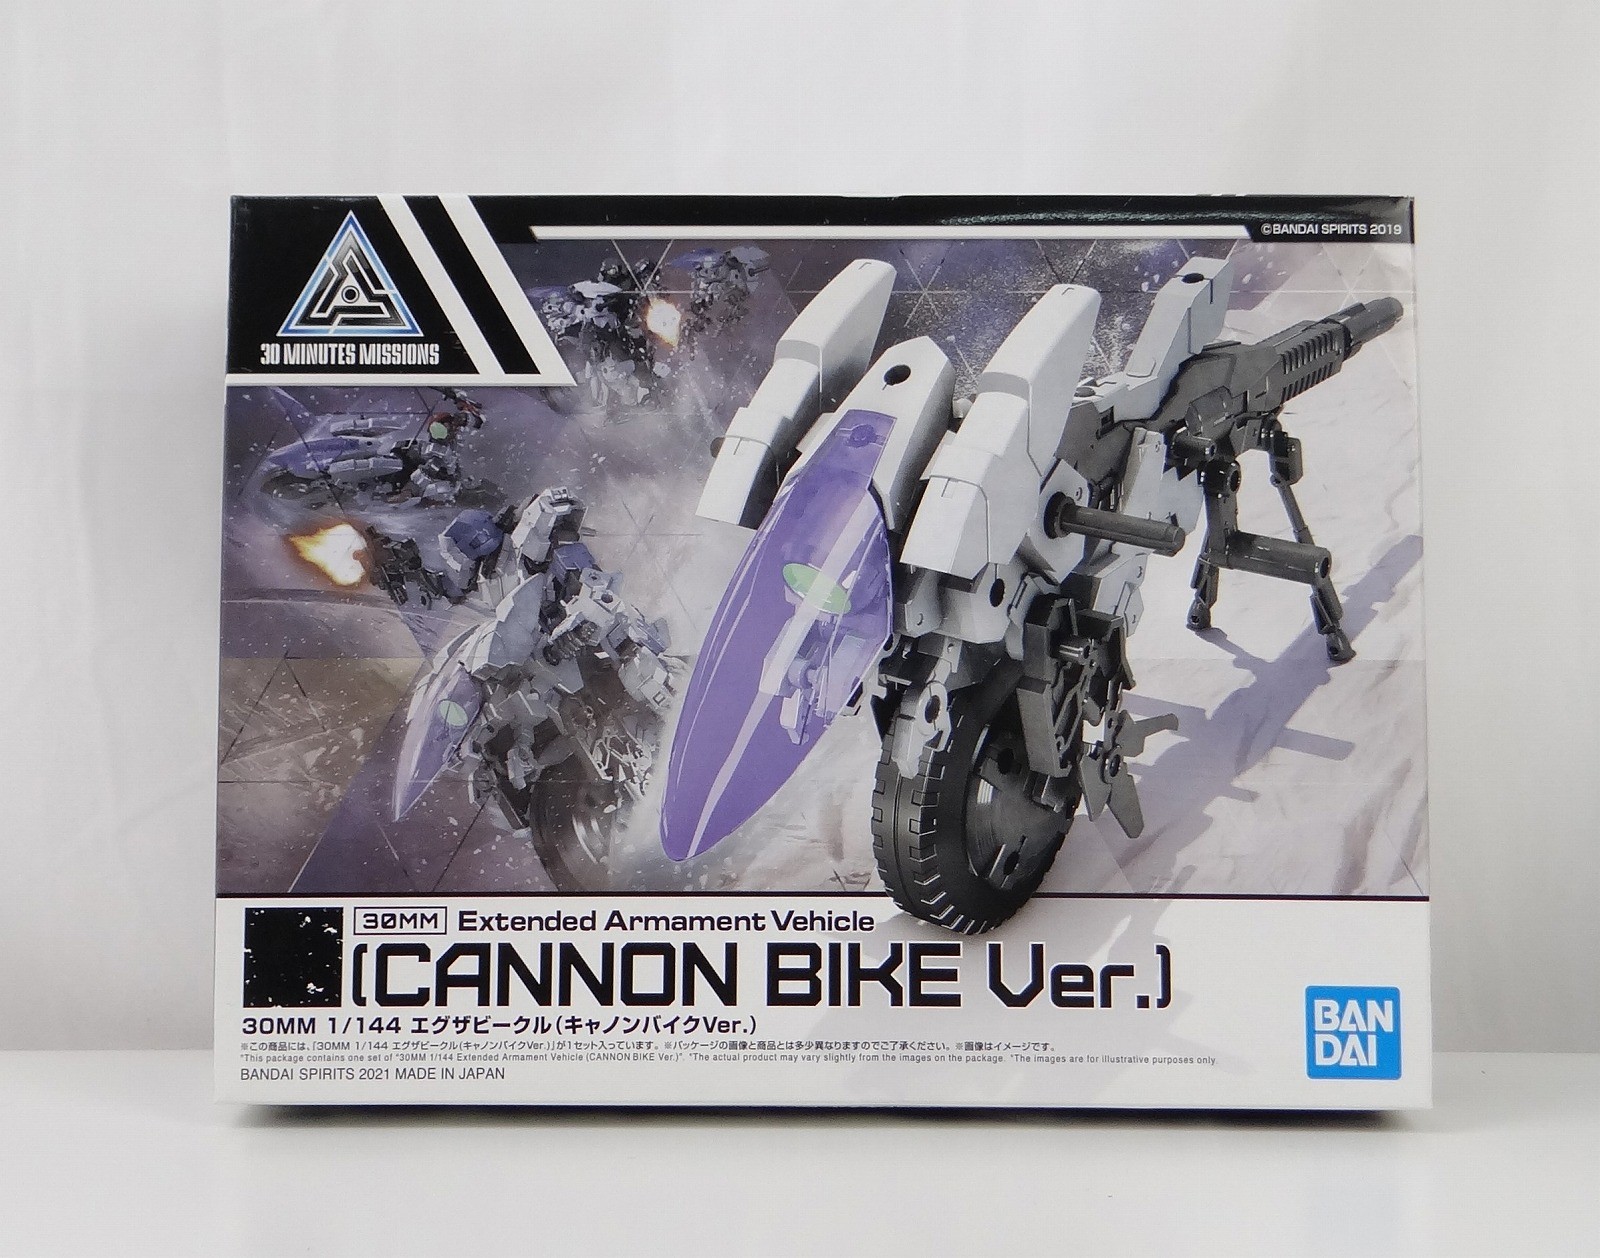 30 MINUTES MISSIONS 1/144 Exa Vehicle (Cannon Bike Ver.)